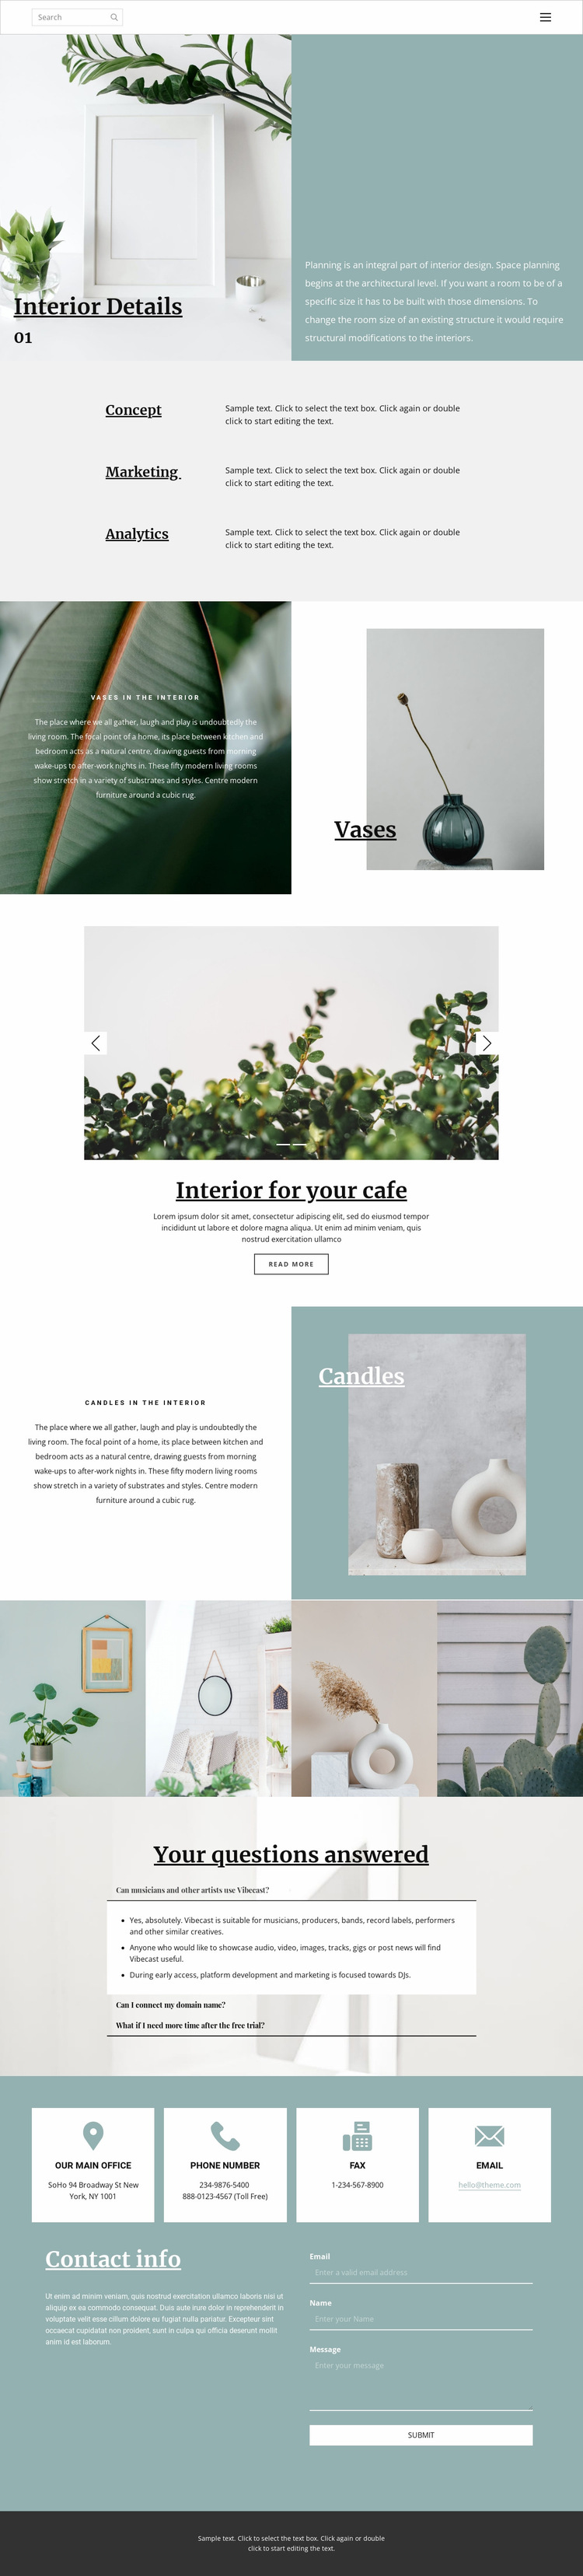 Help in organizing the space at home Website Builder Templates